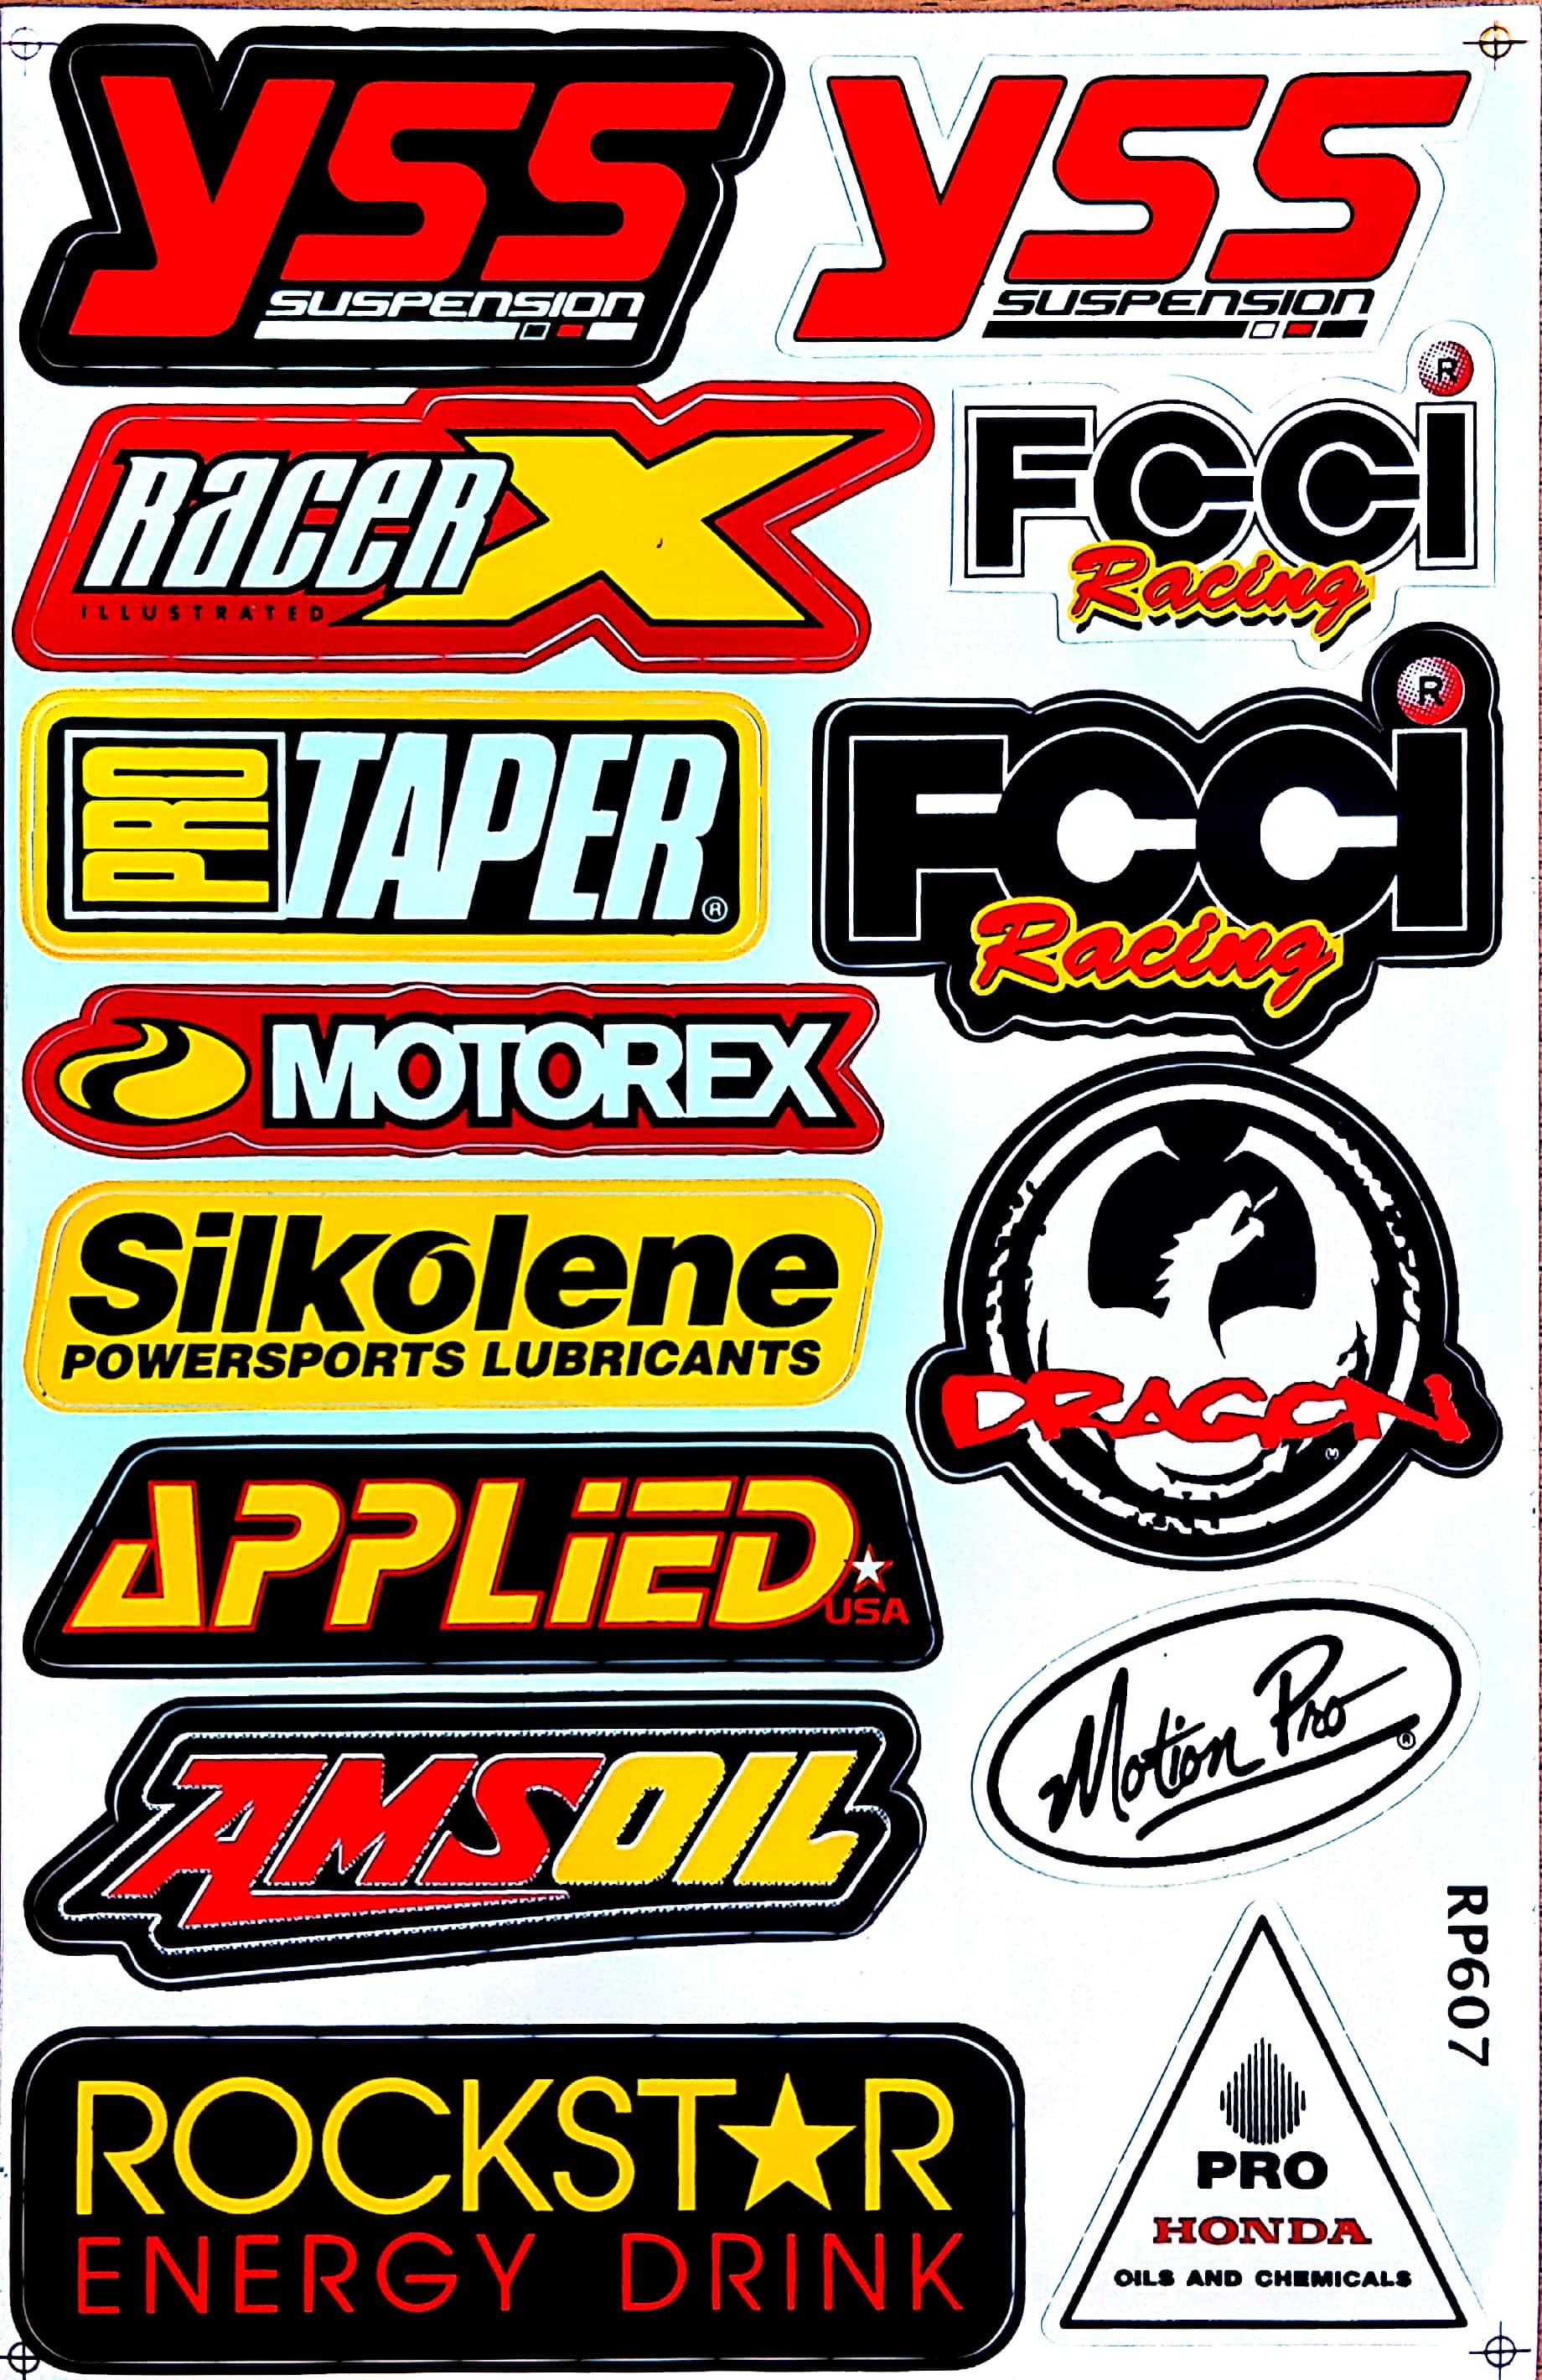 Three Ratels LCS030# 15x15cm Motocross Ride The Bike Colorful Car Sticker  Funny Stickers Styling Removable Decal